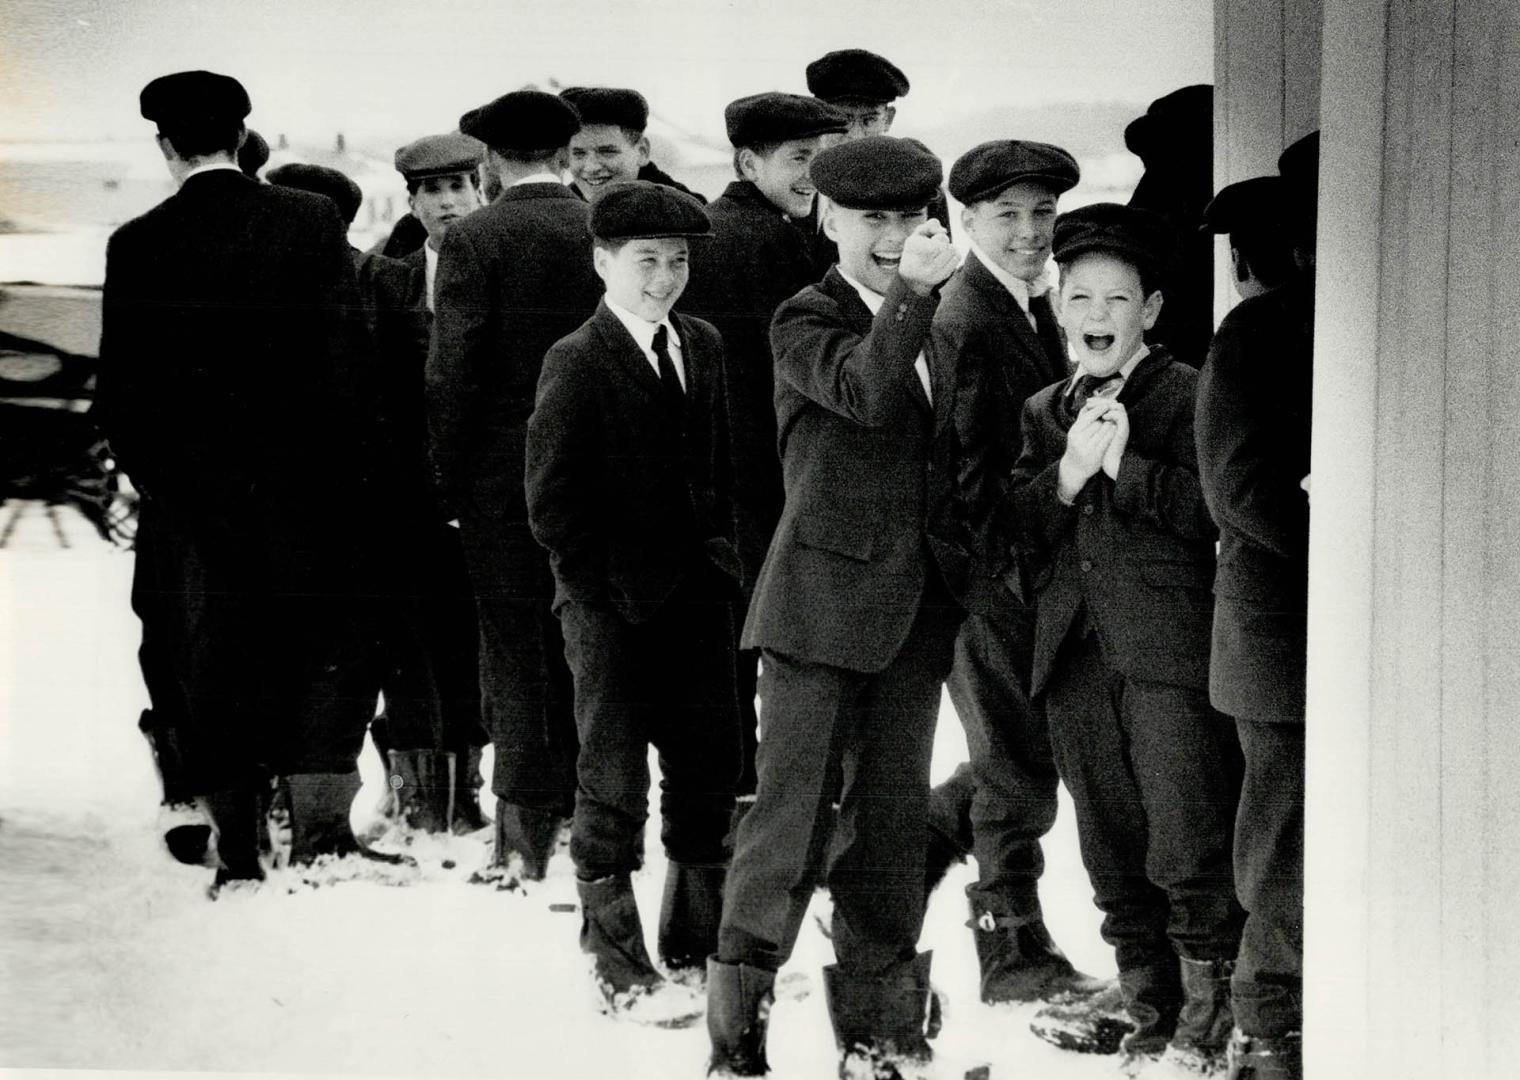 Boys and young men gather after a Sunday service at the Wallenstein meeting house